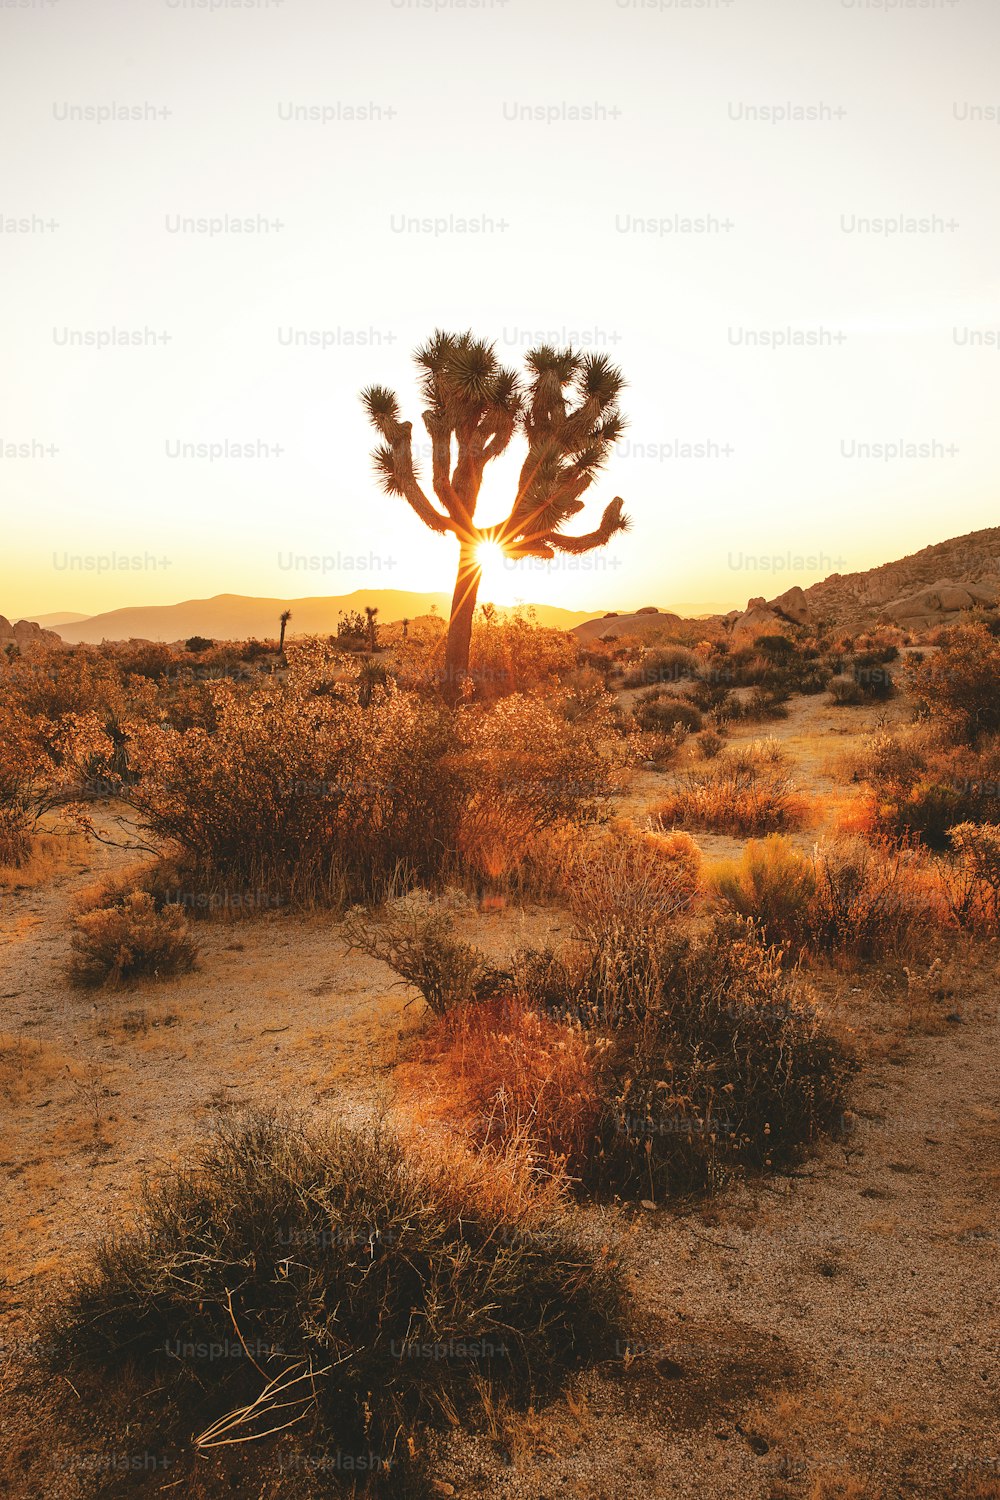 the sun is setting in the desert with a cactus in the foreground